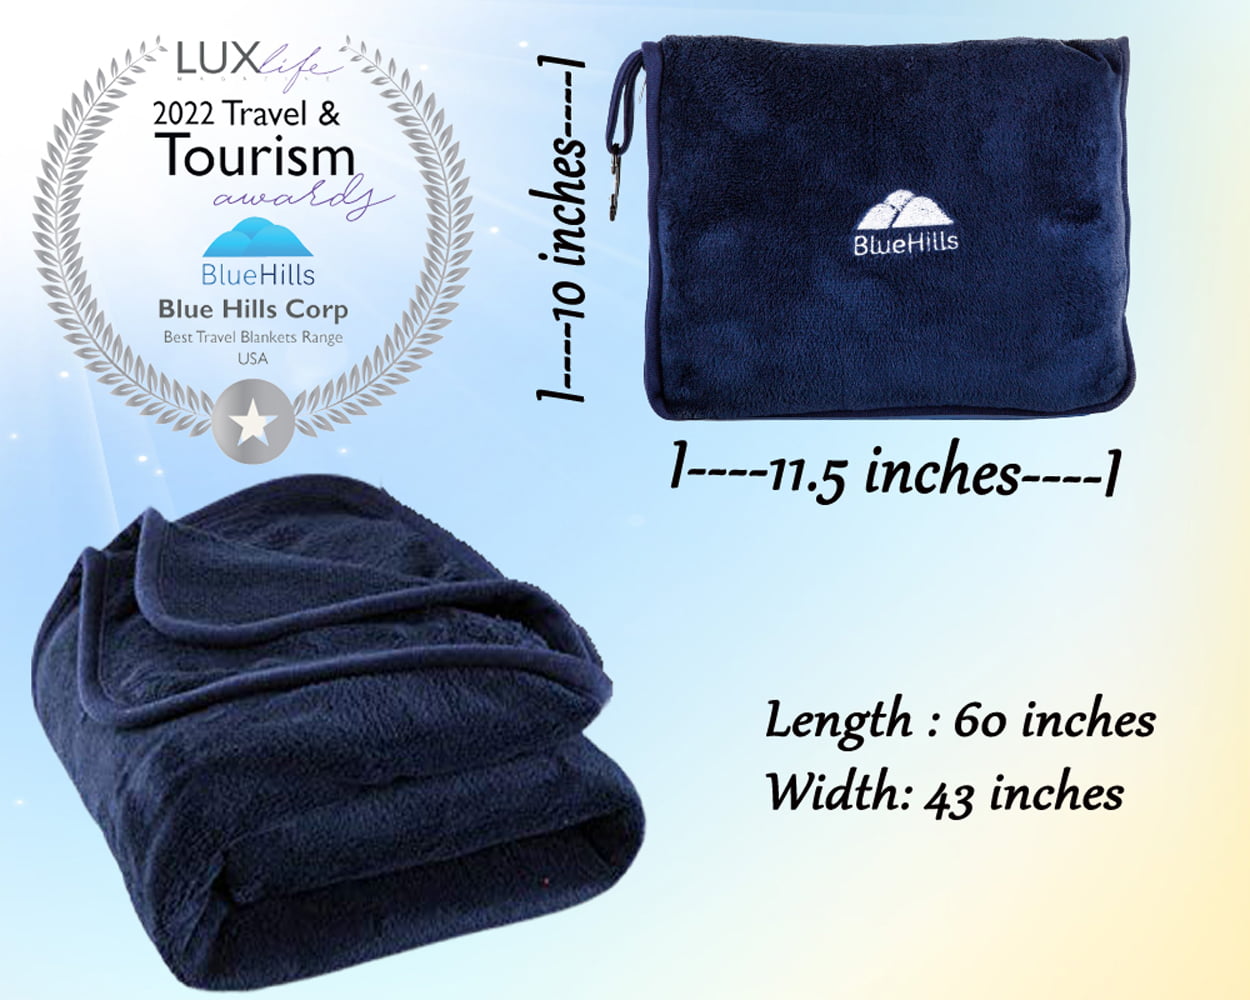 Black T008 BlueHills Premium Soft Travel Blanket Pillow Airplane Blanket Packed in Soft Bag Pillowcase with Hand Luggage Belt and Backpack Clip Compact Pack Large Blanket for Any Travel 